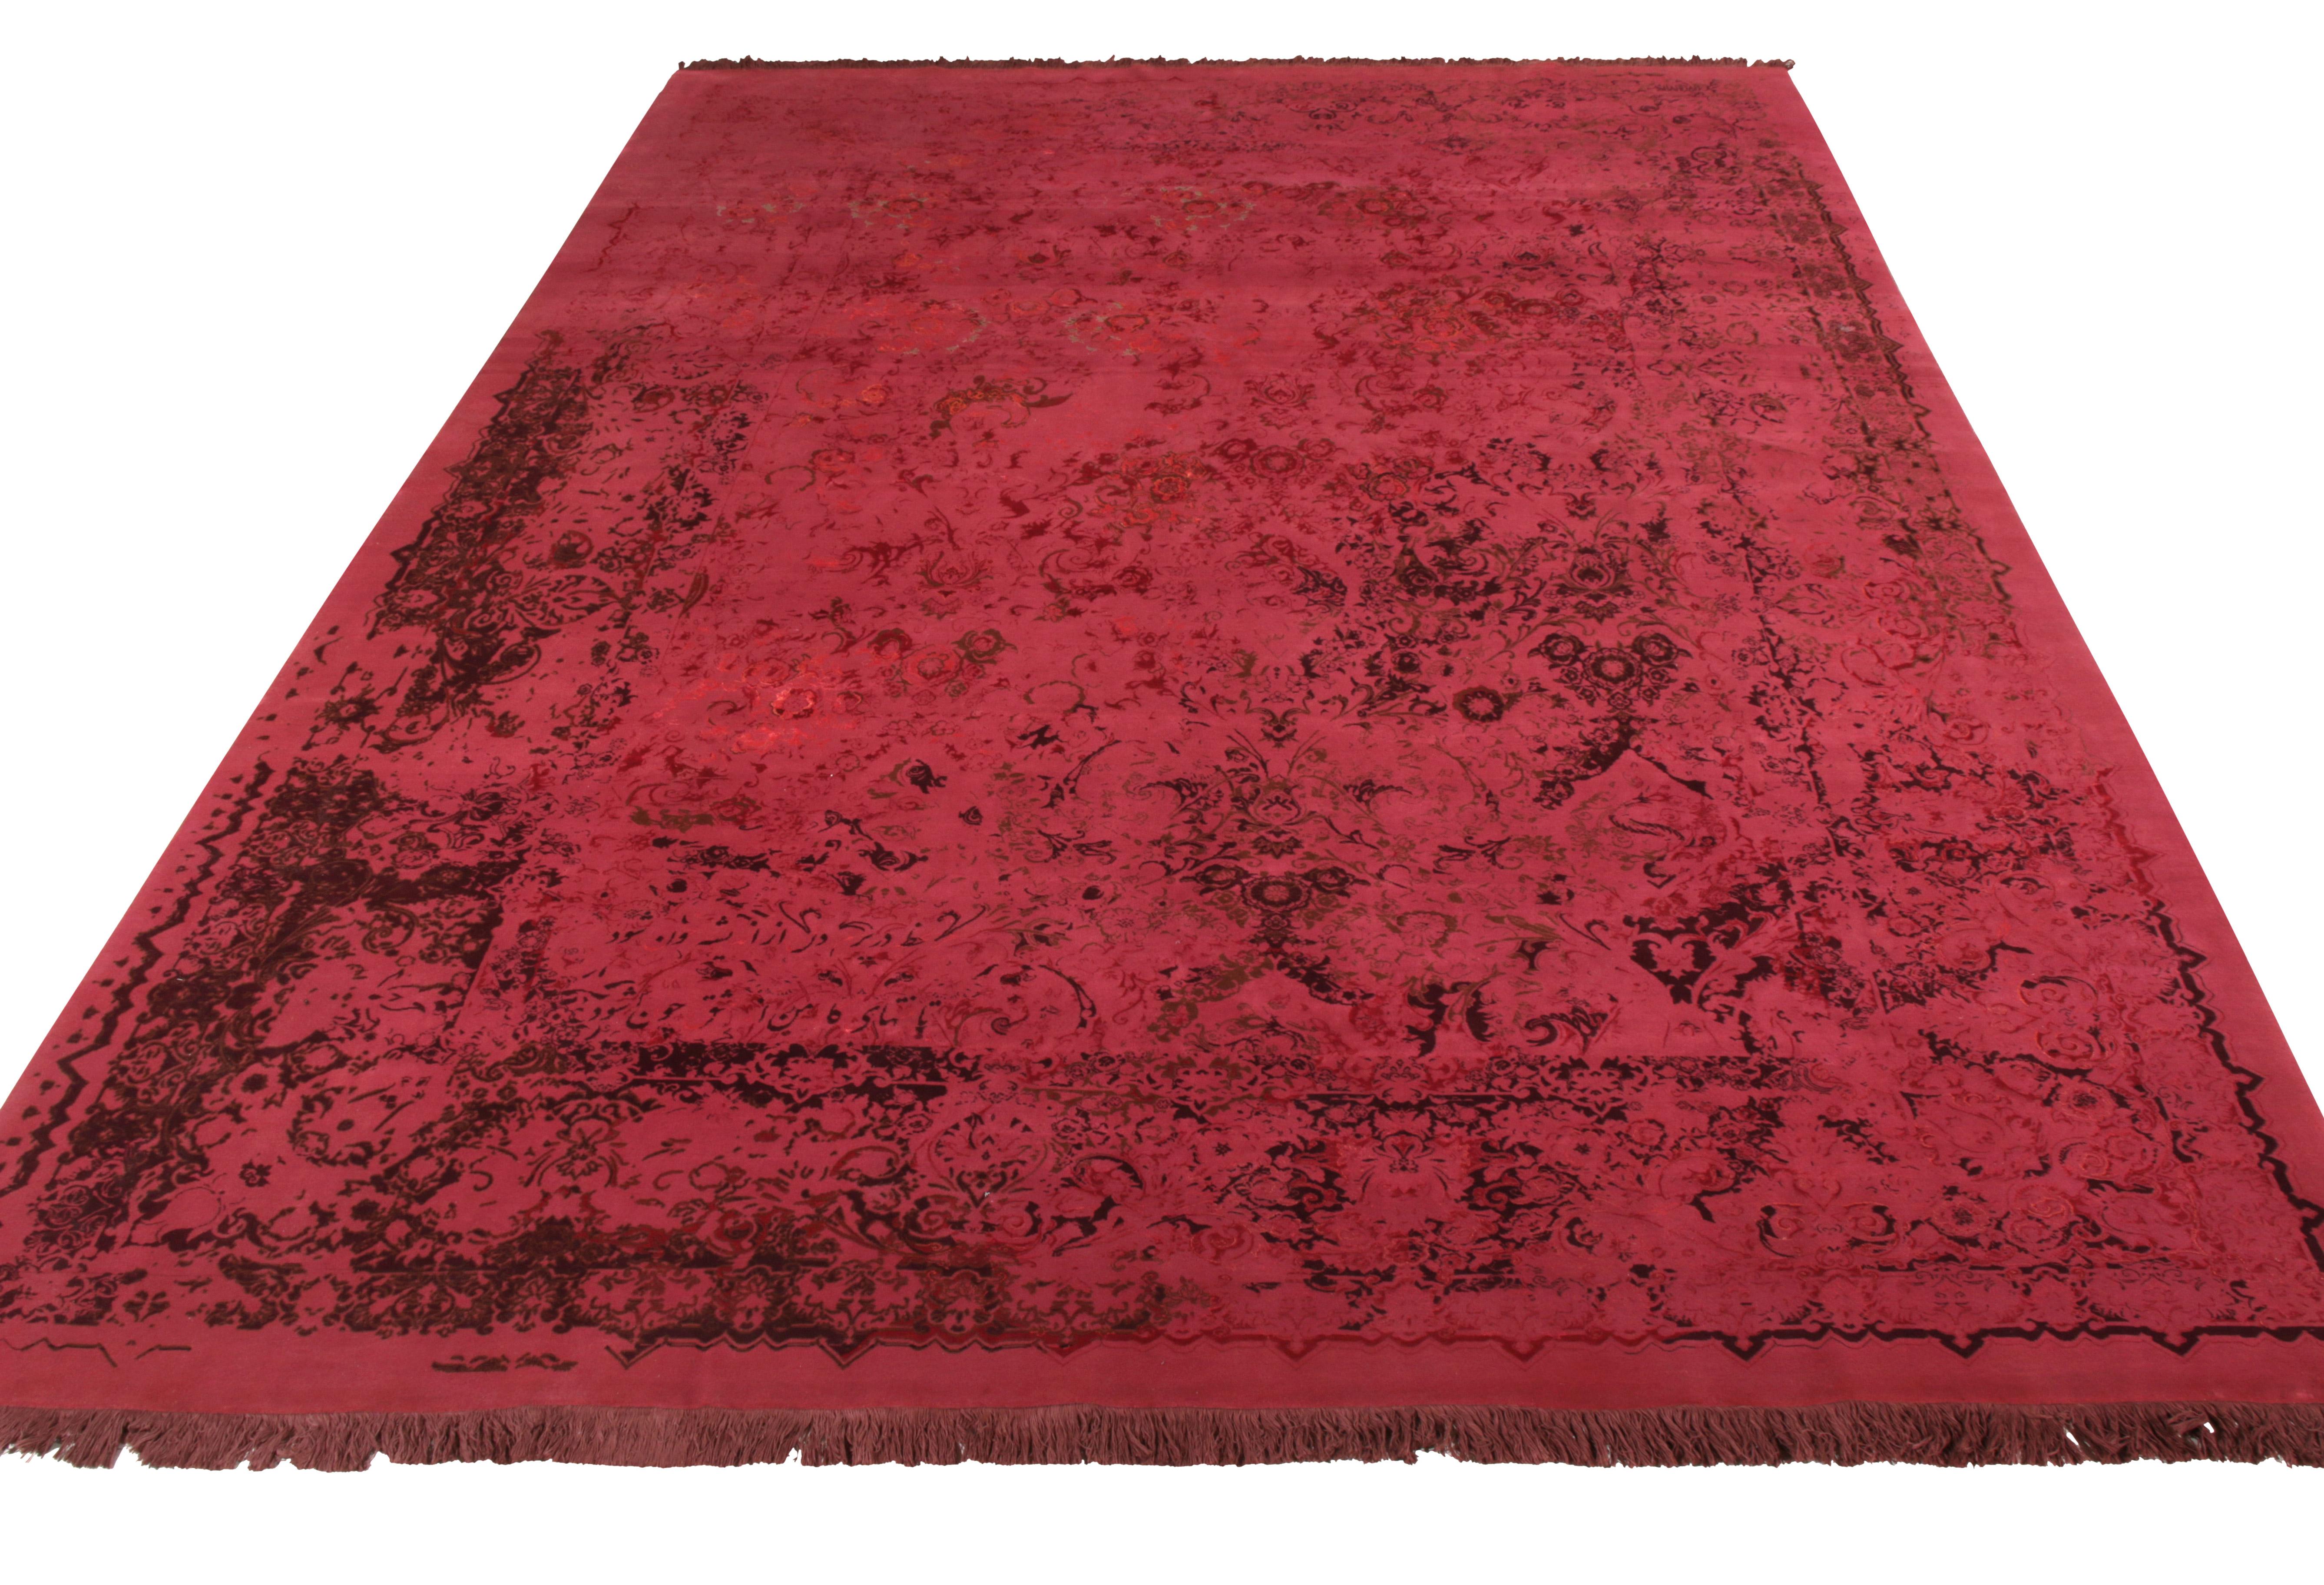 Rug & Kilim proudly presents one of the most refined Persian pieces from its coveted collection. A labour of love, this 10x13 size rug is an artistic feat from one of the best workshops of its style. The precious piece commands attention with its